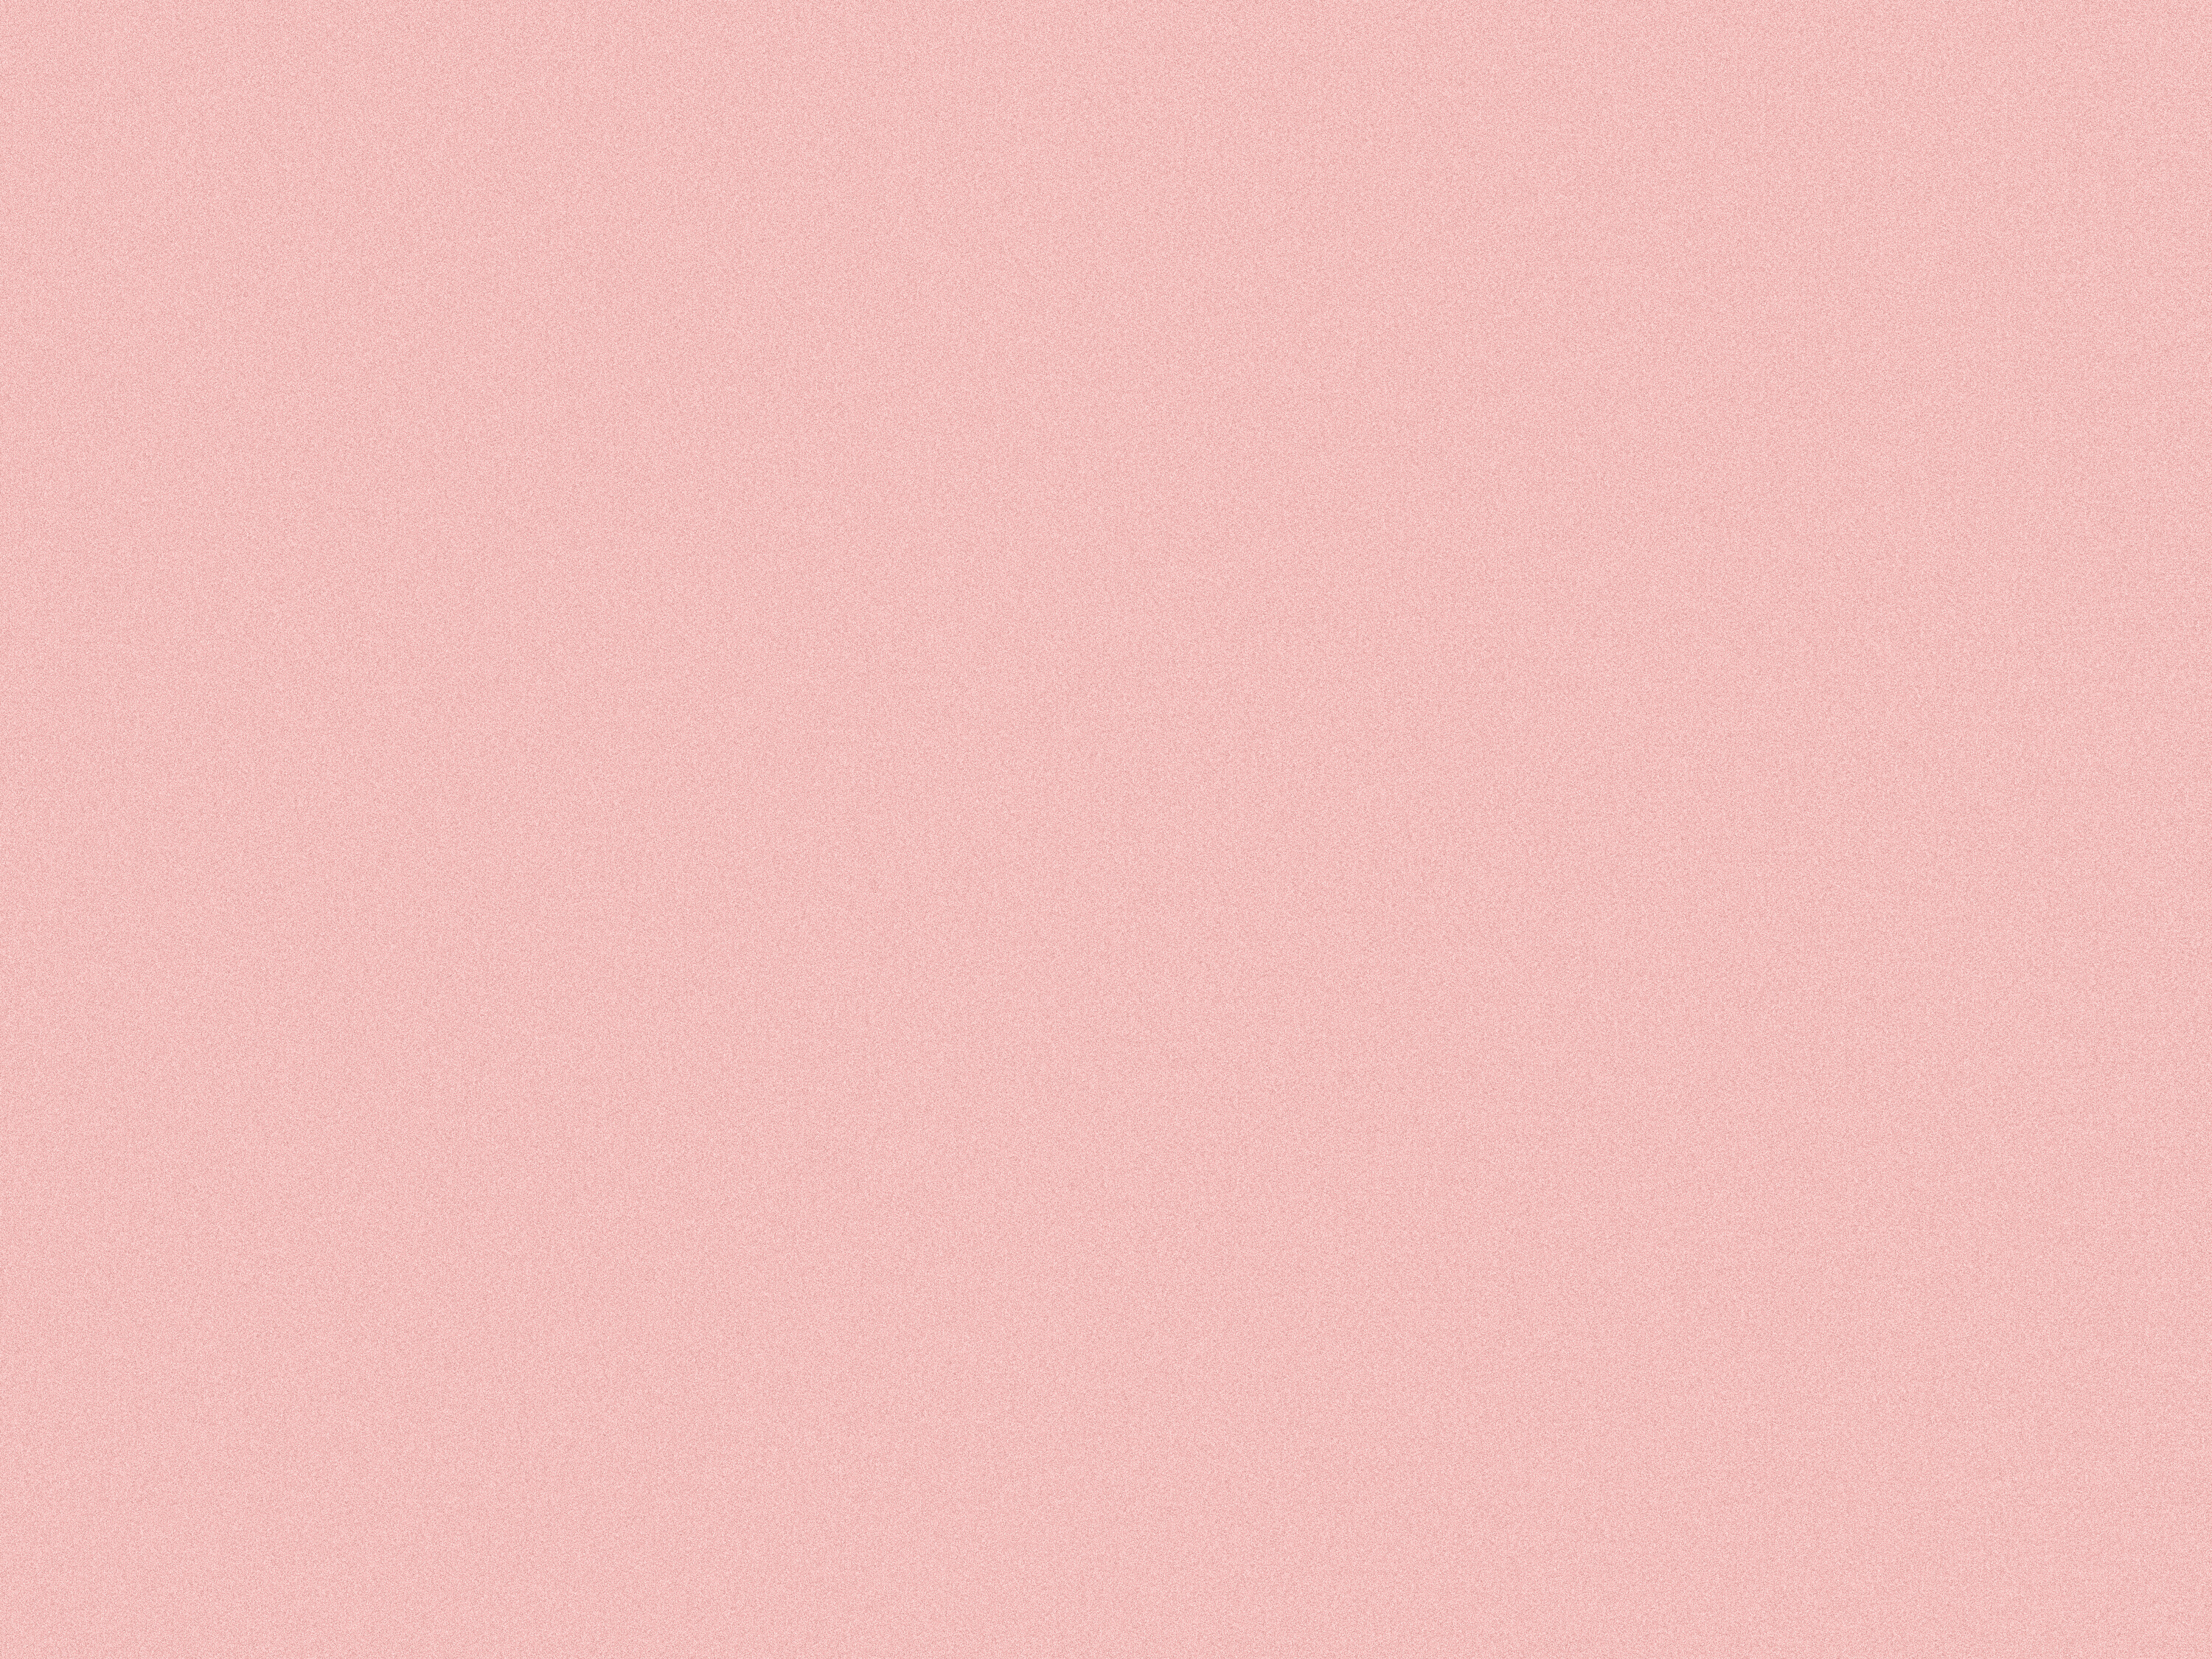 Salmon Pink Grainy Solid Background